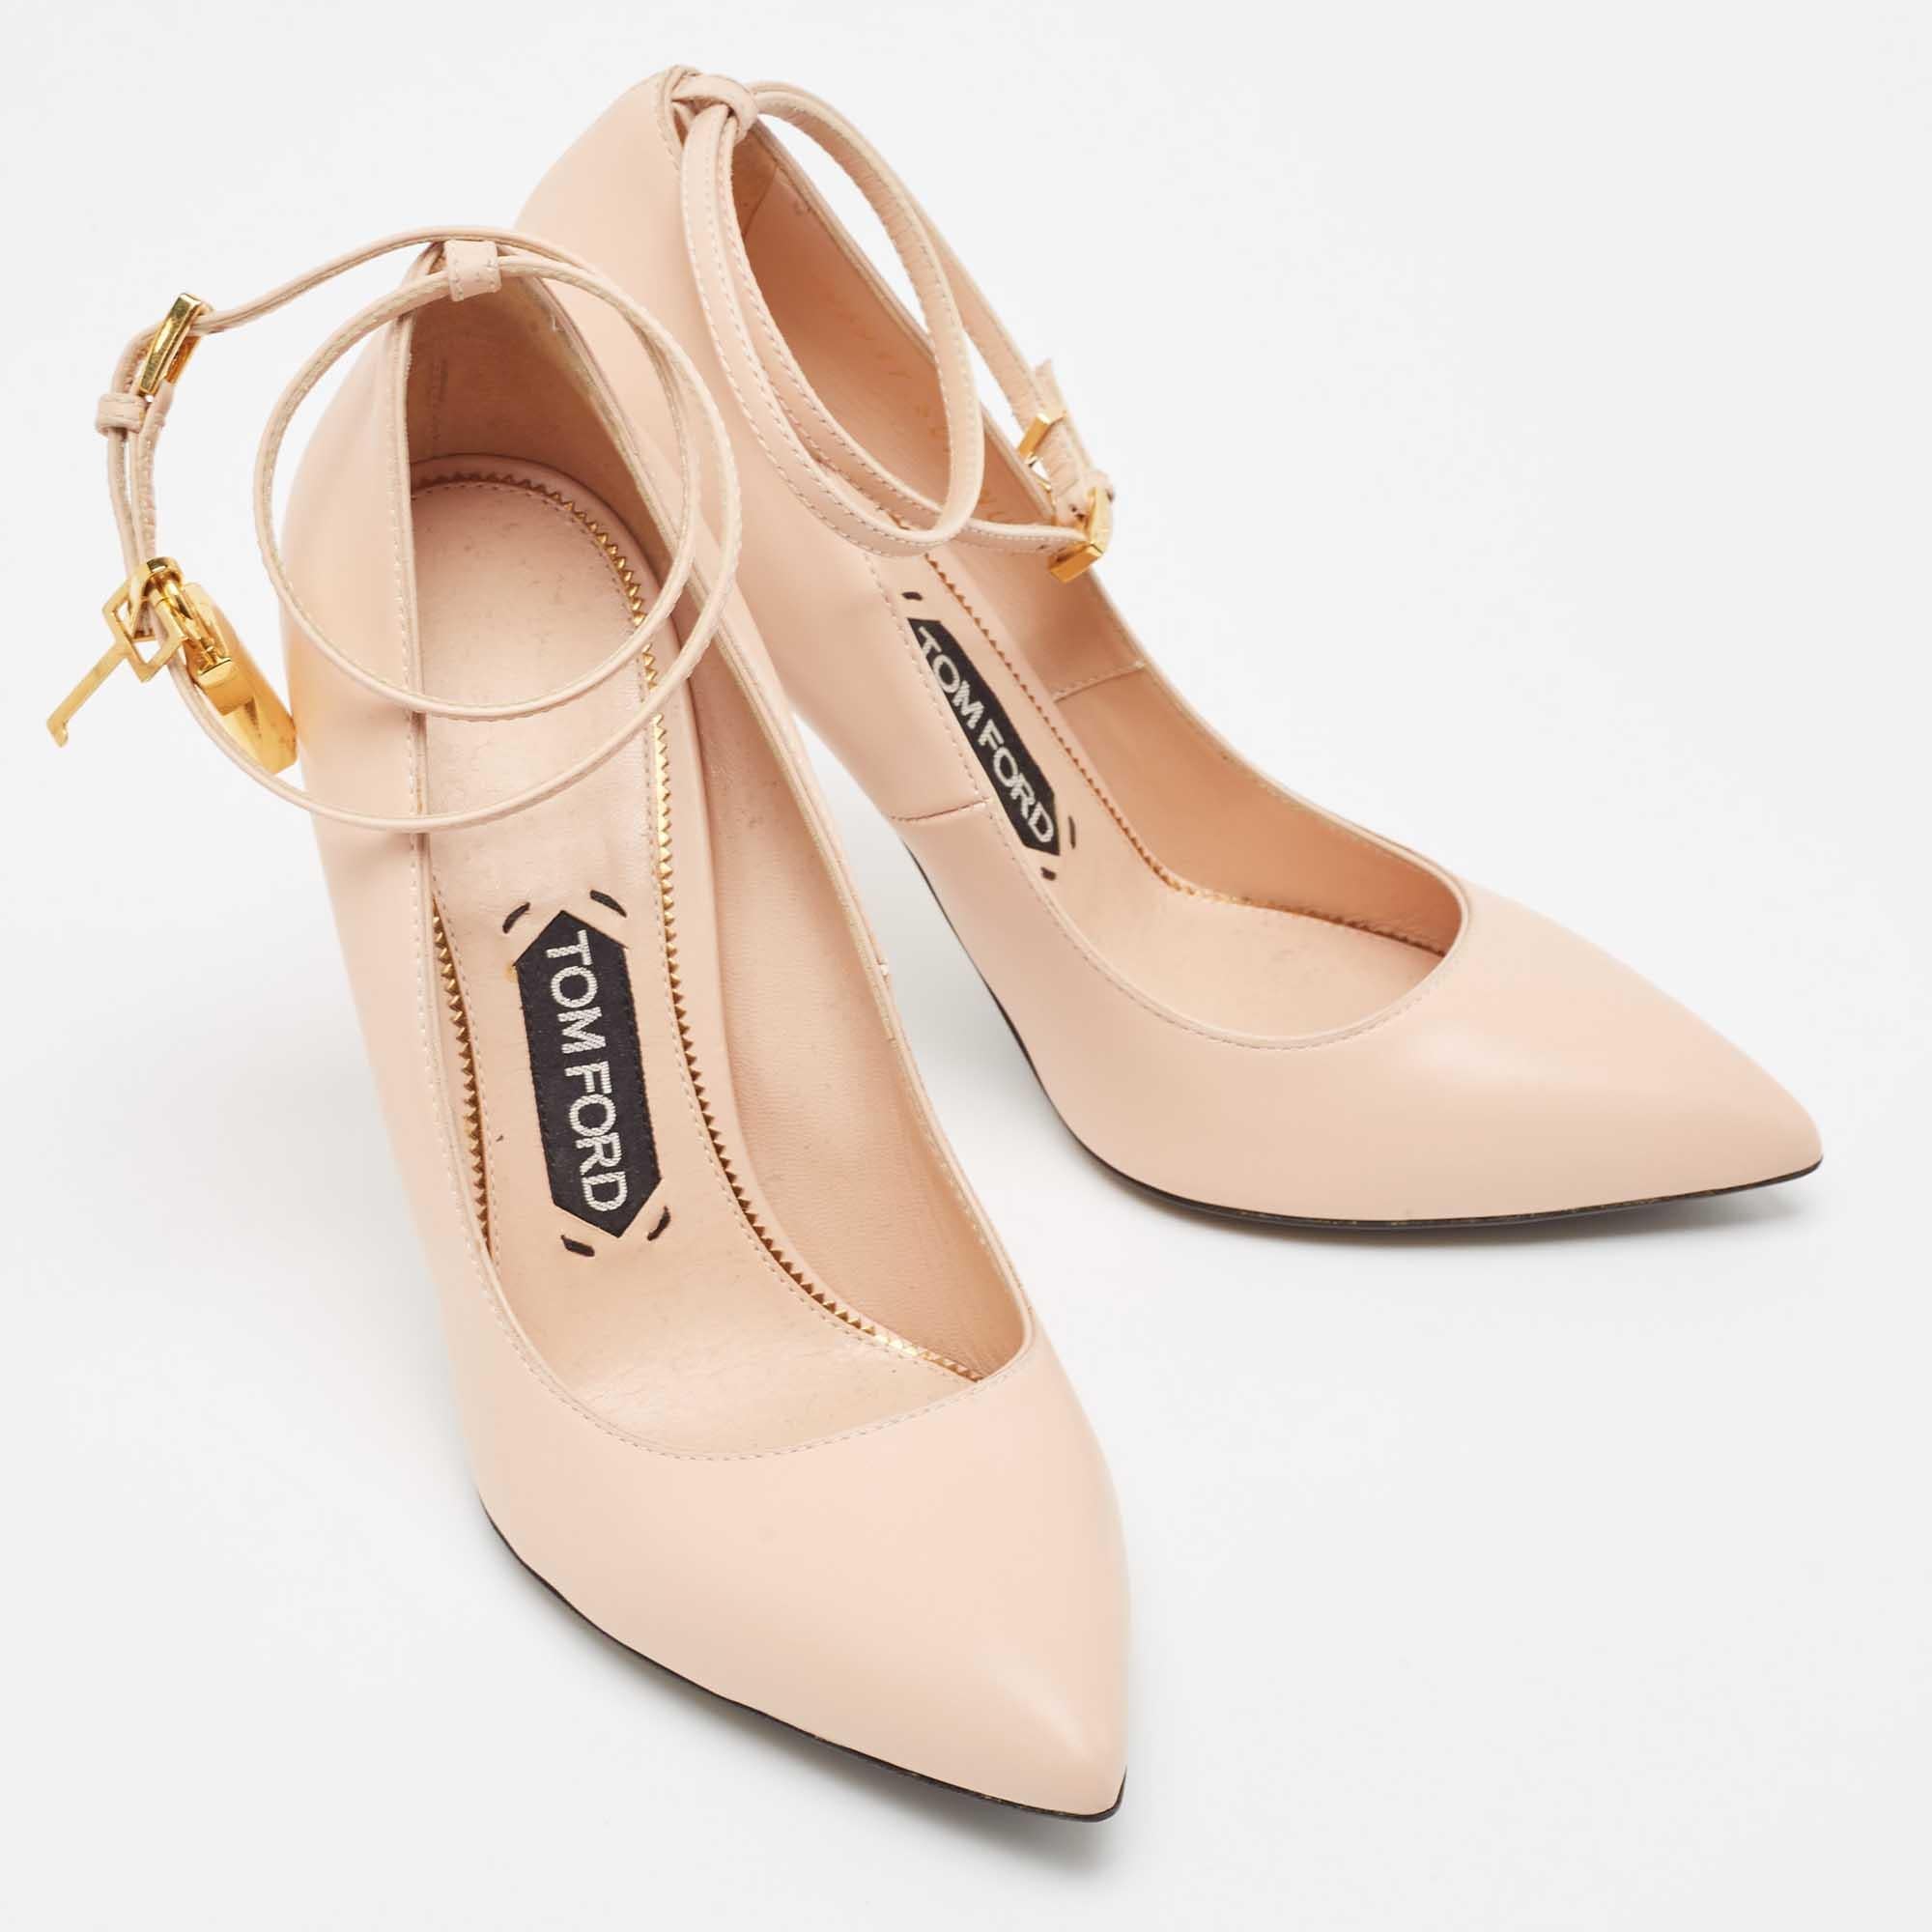 Tom Ford Beige Leather Padlock Pointed Toe Pumps Size 38.5 For Sale 4